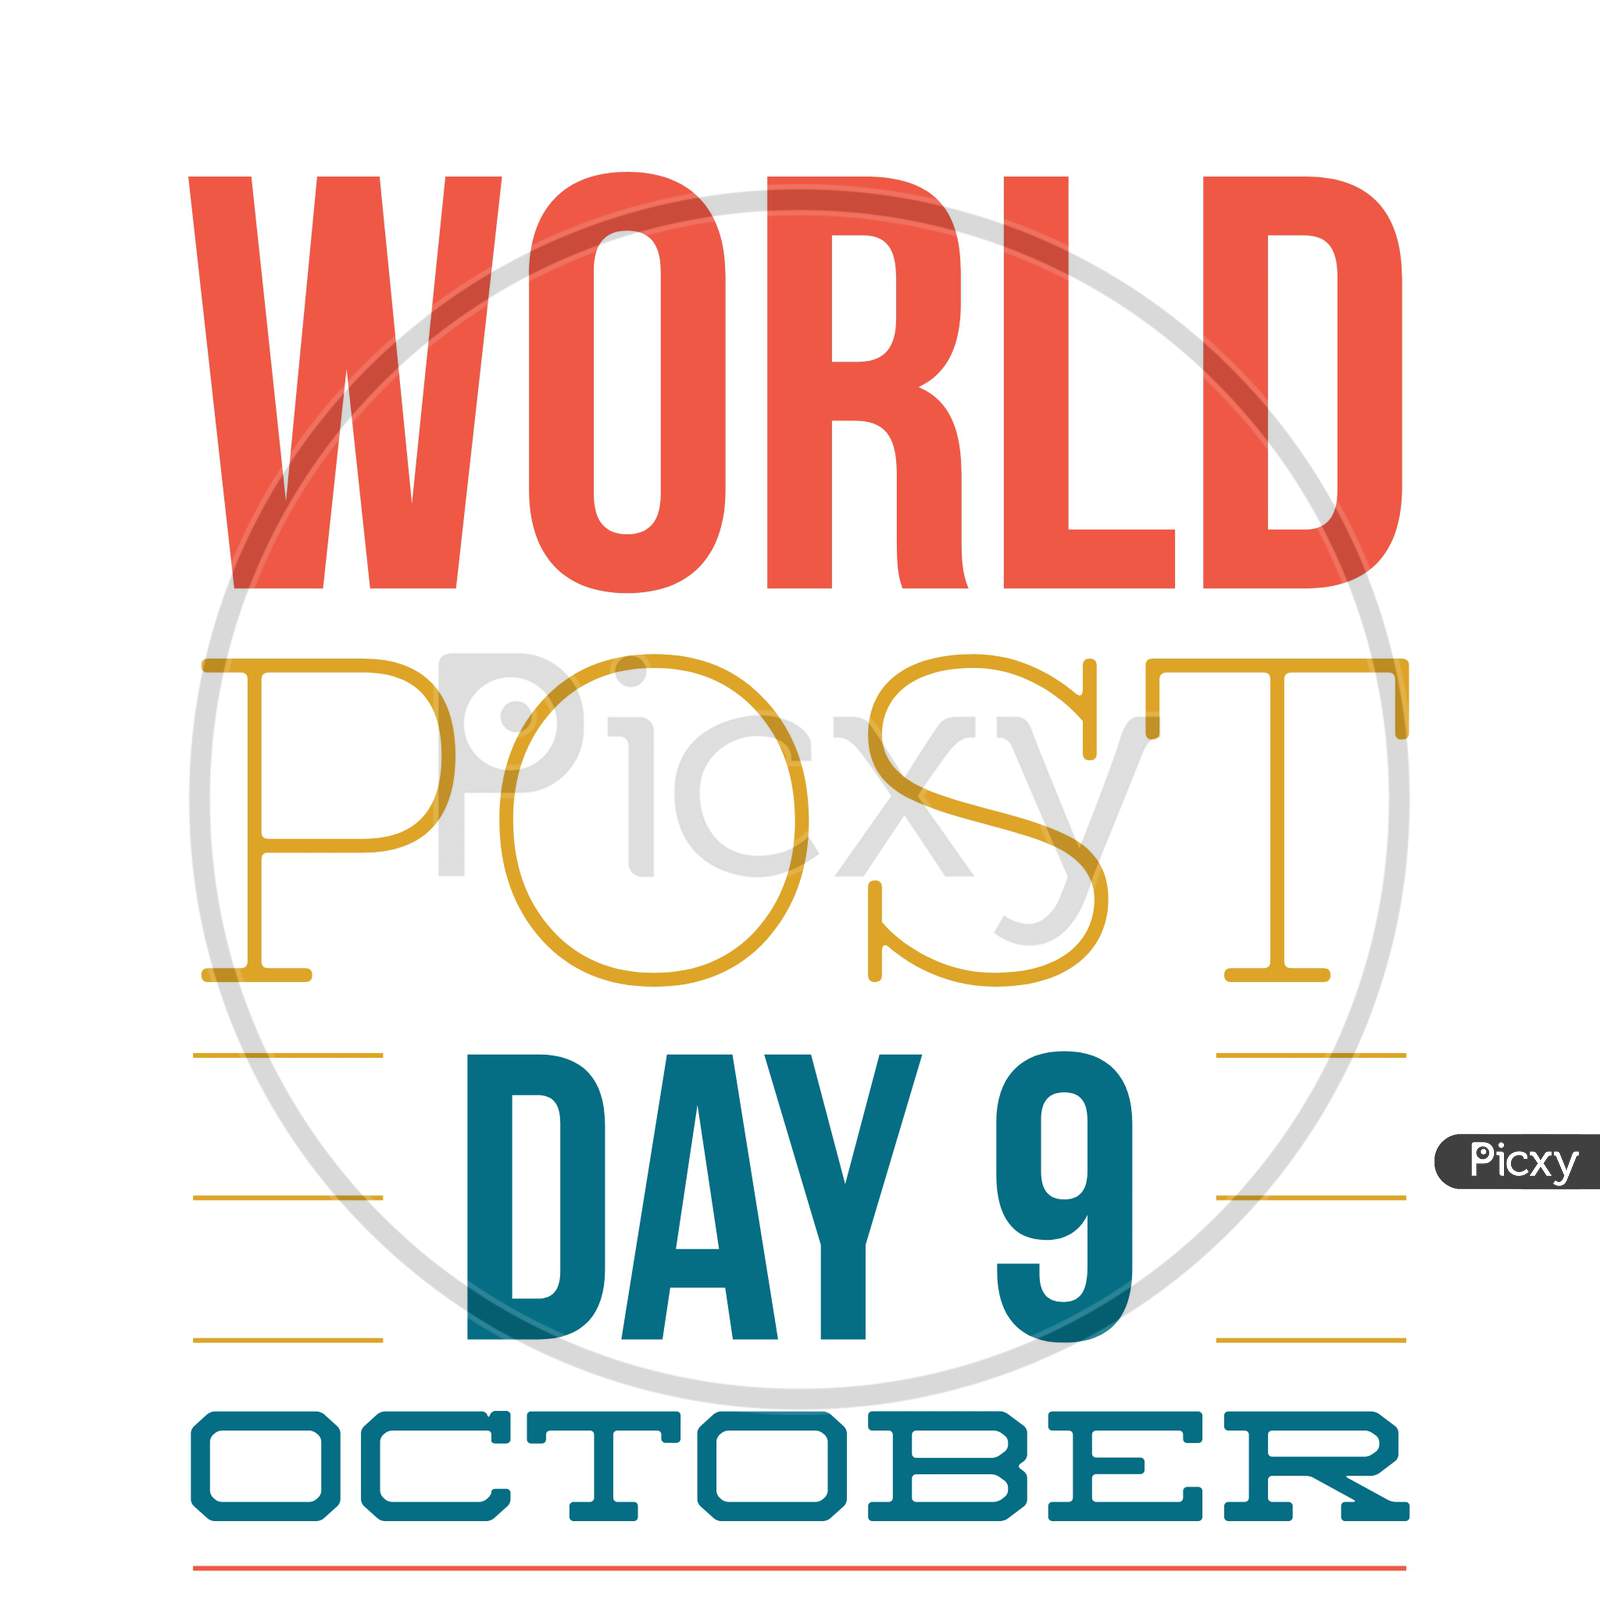 Image With Text "World Post Day 9 October"